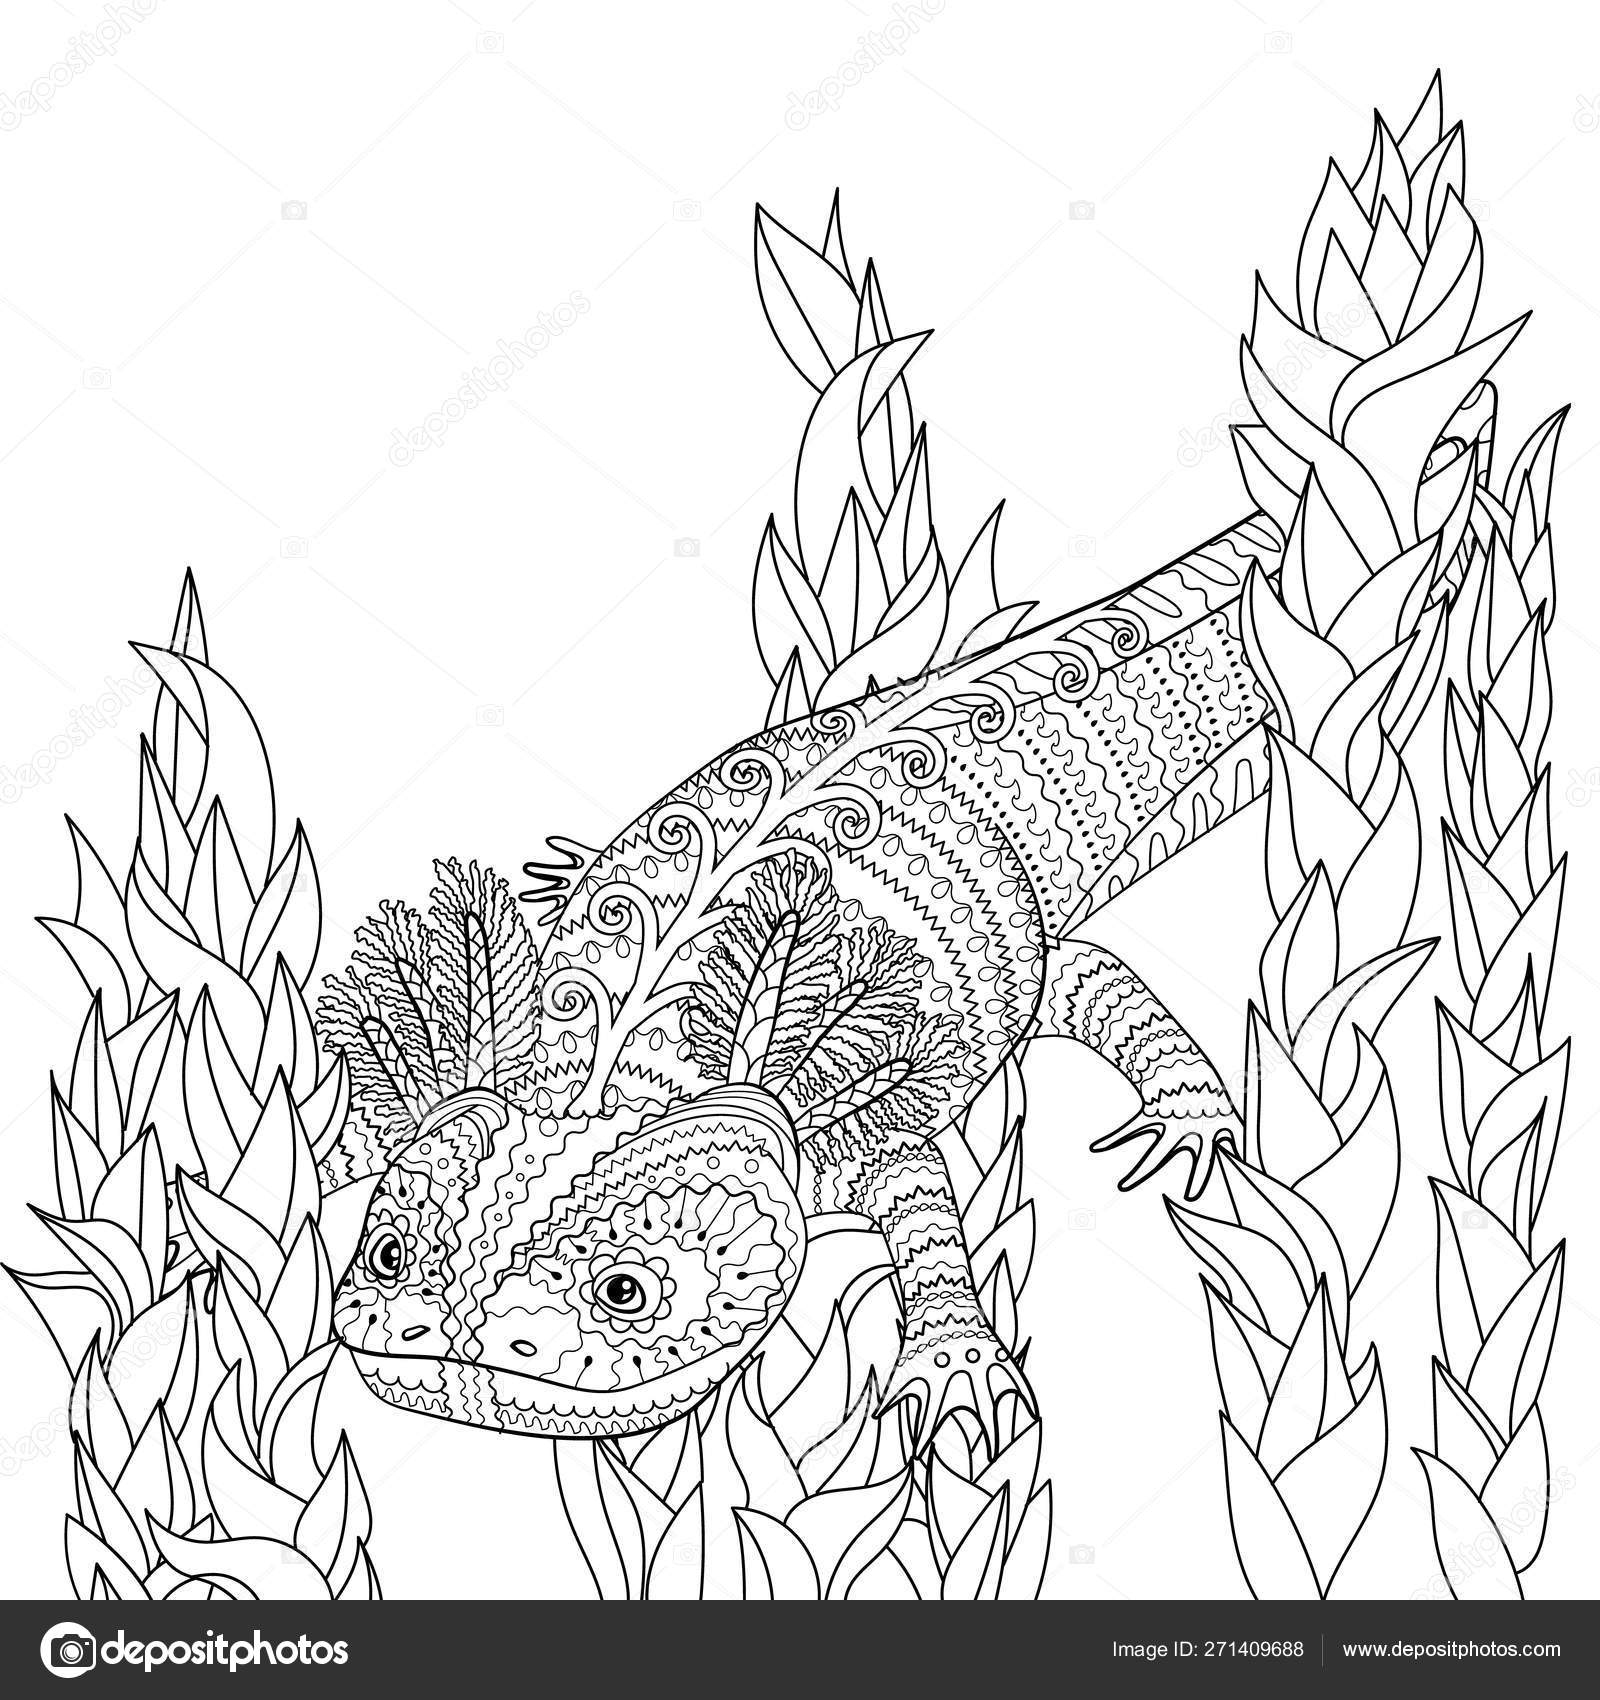 Coloring page with axolotl in patterned style stock vector by lezhepyoka